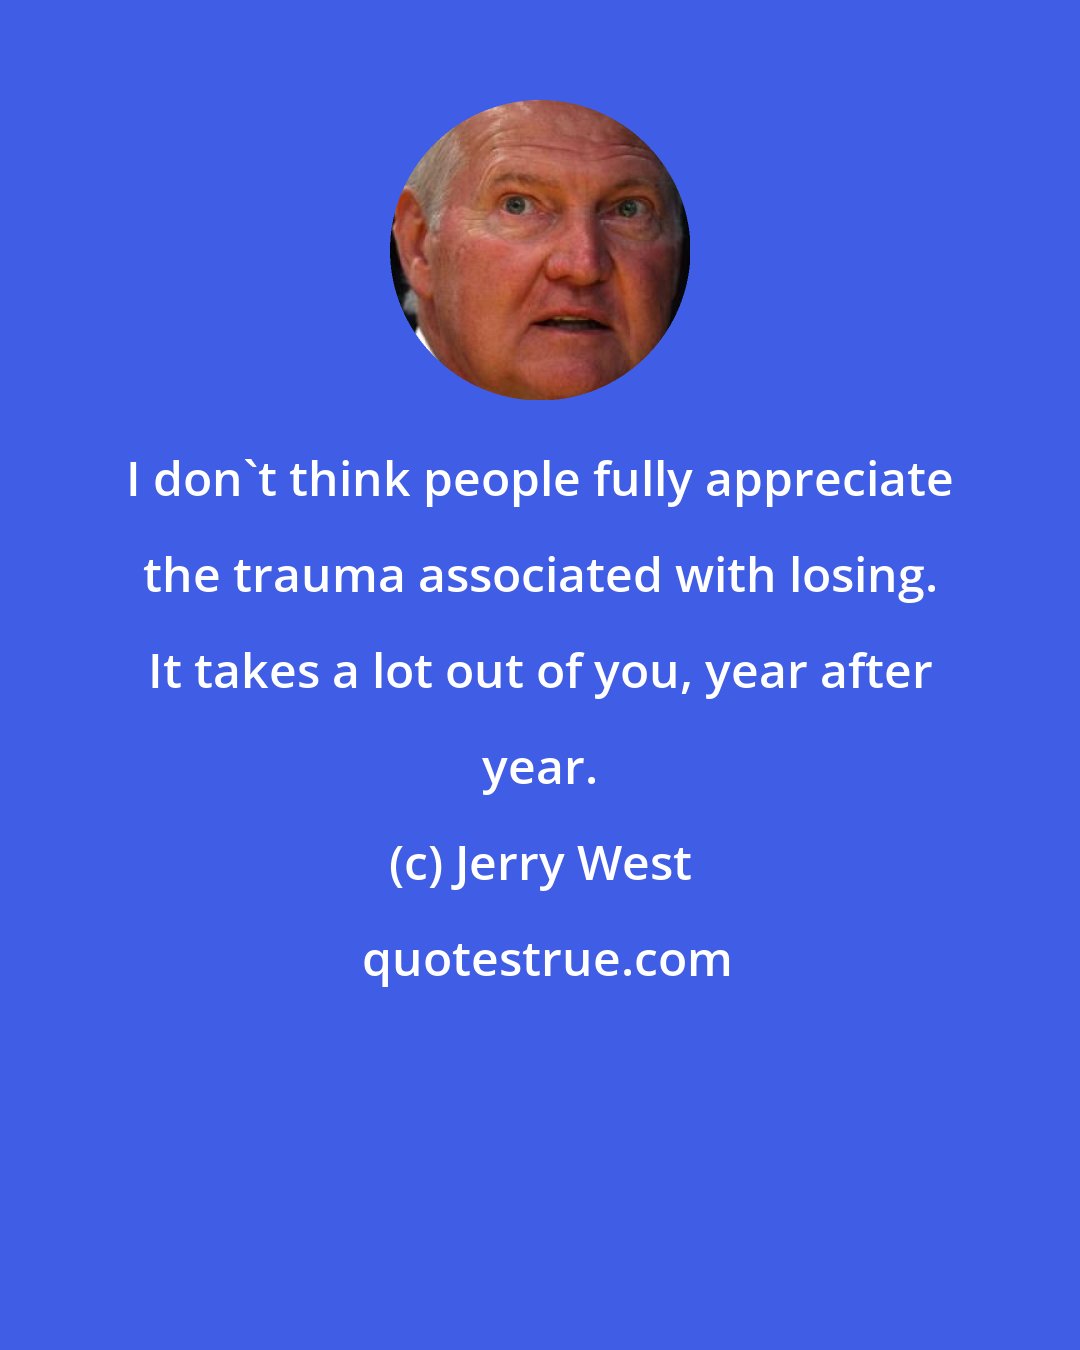 Jerry West: I don't think people fully appreciate the trauma associated with losing. It takes a lot out of you, year after year.